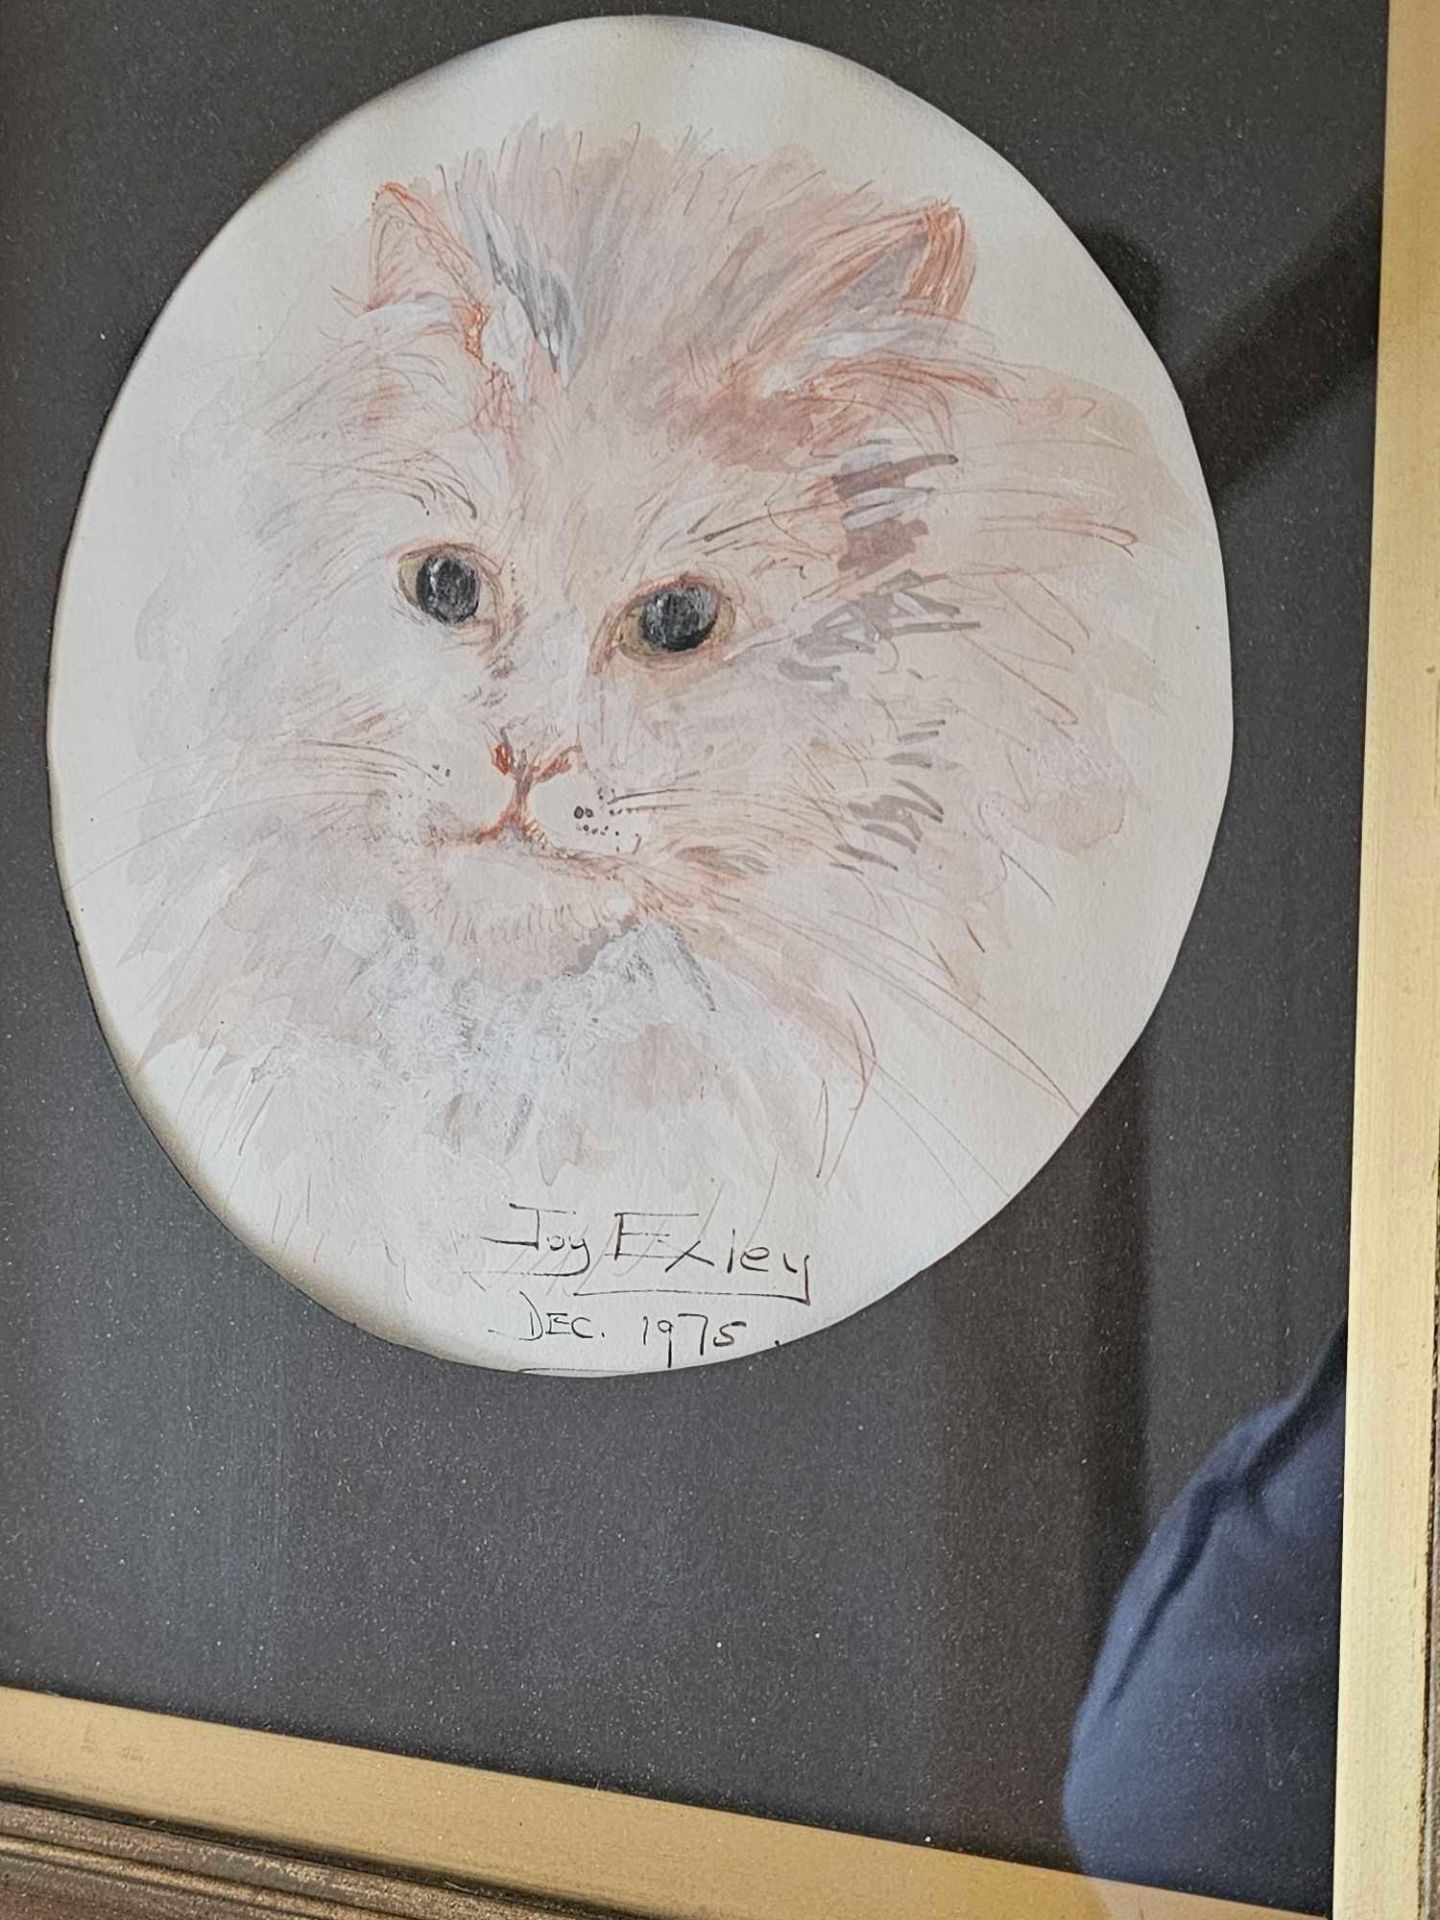 Framed Study Of A Cats Face Signed Artwork Joy Exley 1975 30 X 39cm - Image 3 of 3